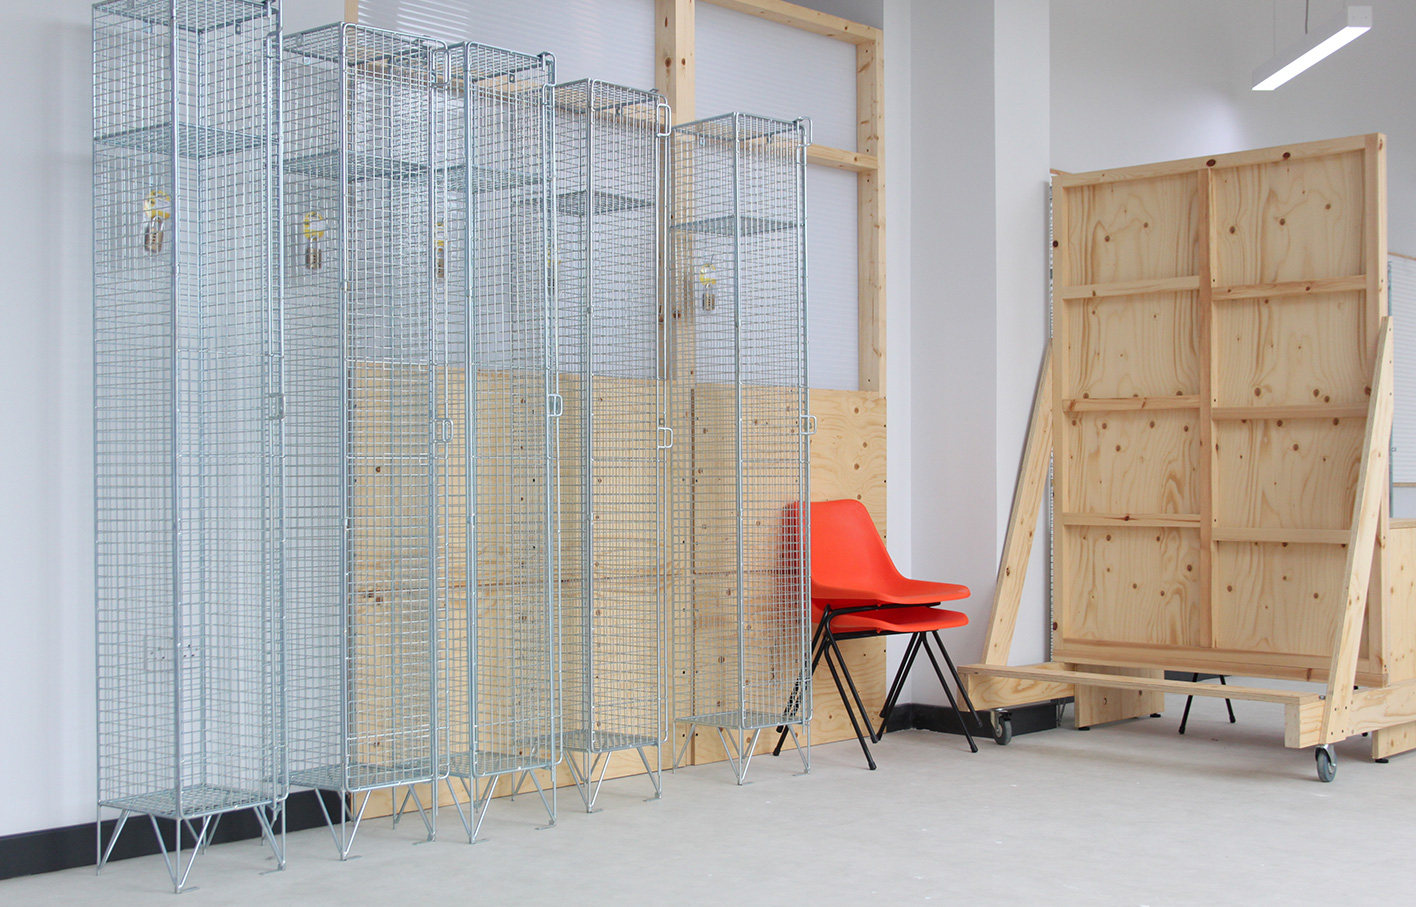 Aldworth James & Bond | Furniture fabrication with Studio Raw in south east London